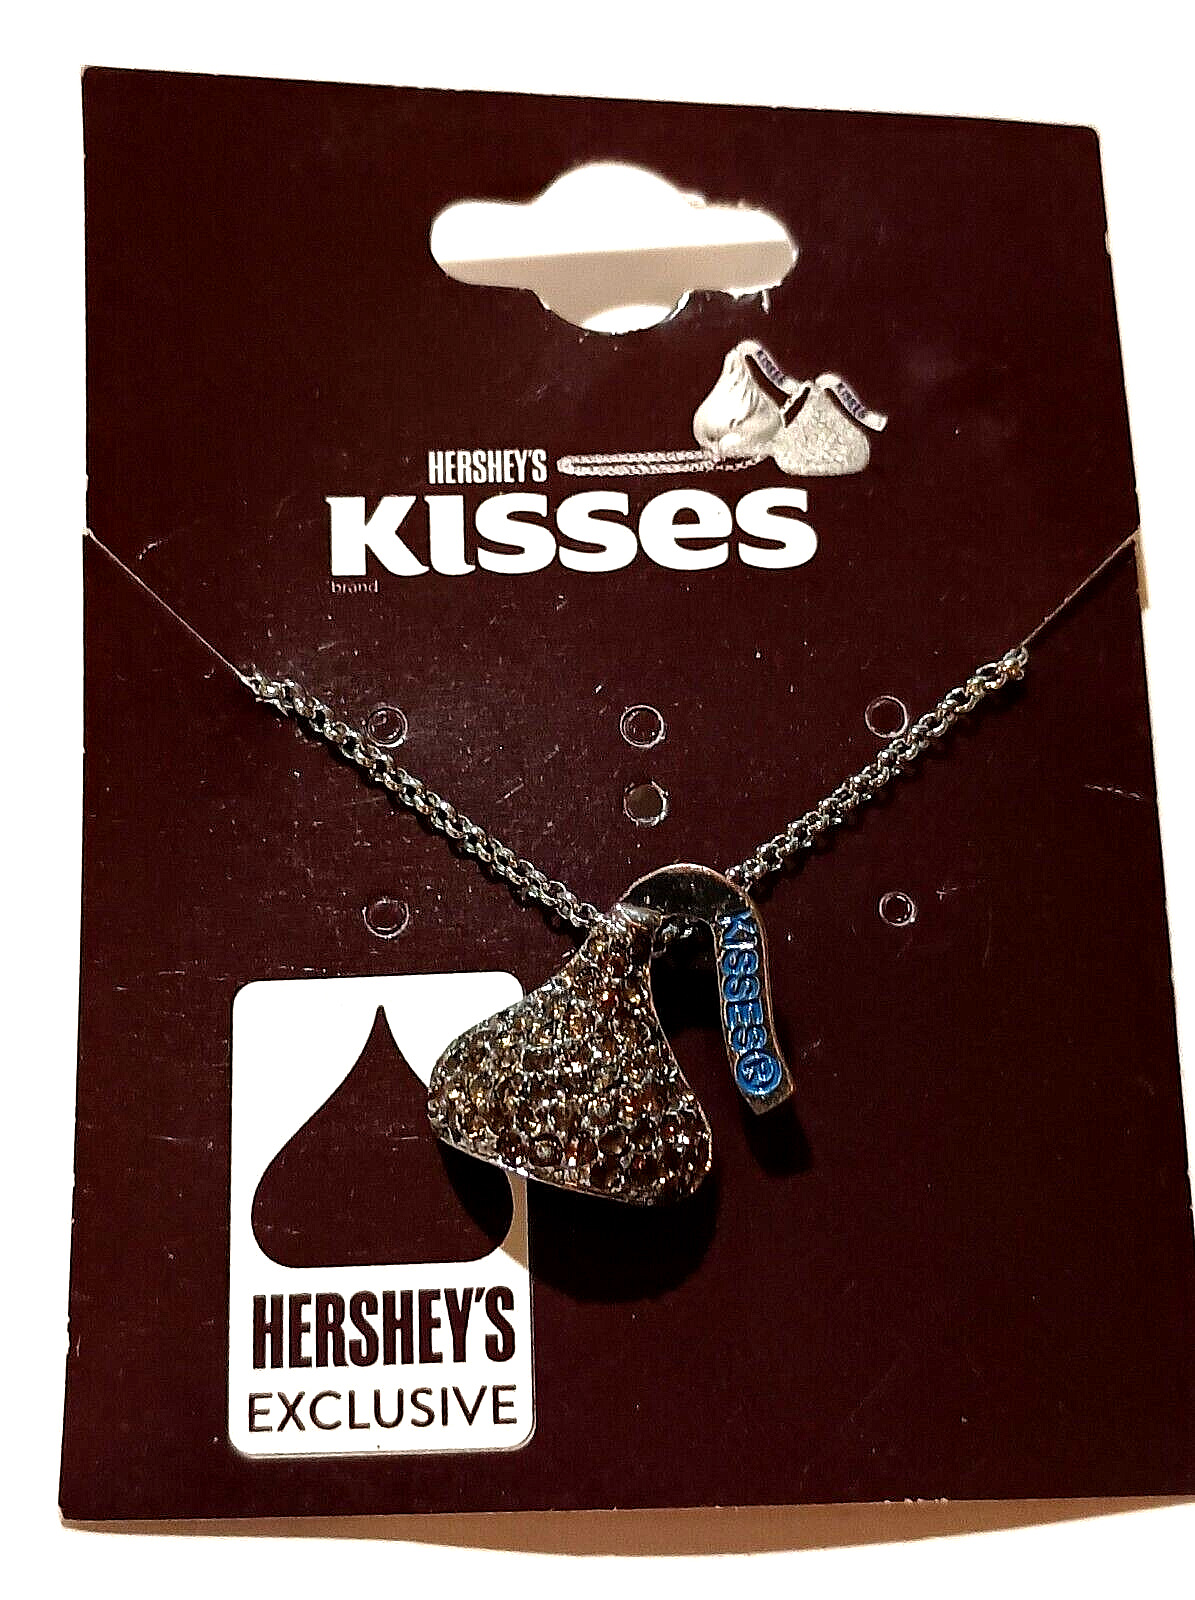 Hershey's Kisses Exclusive Candy Shaped Necklace & Pendant Jewelry New NOS MOC